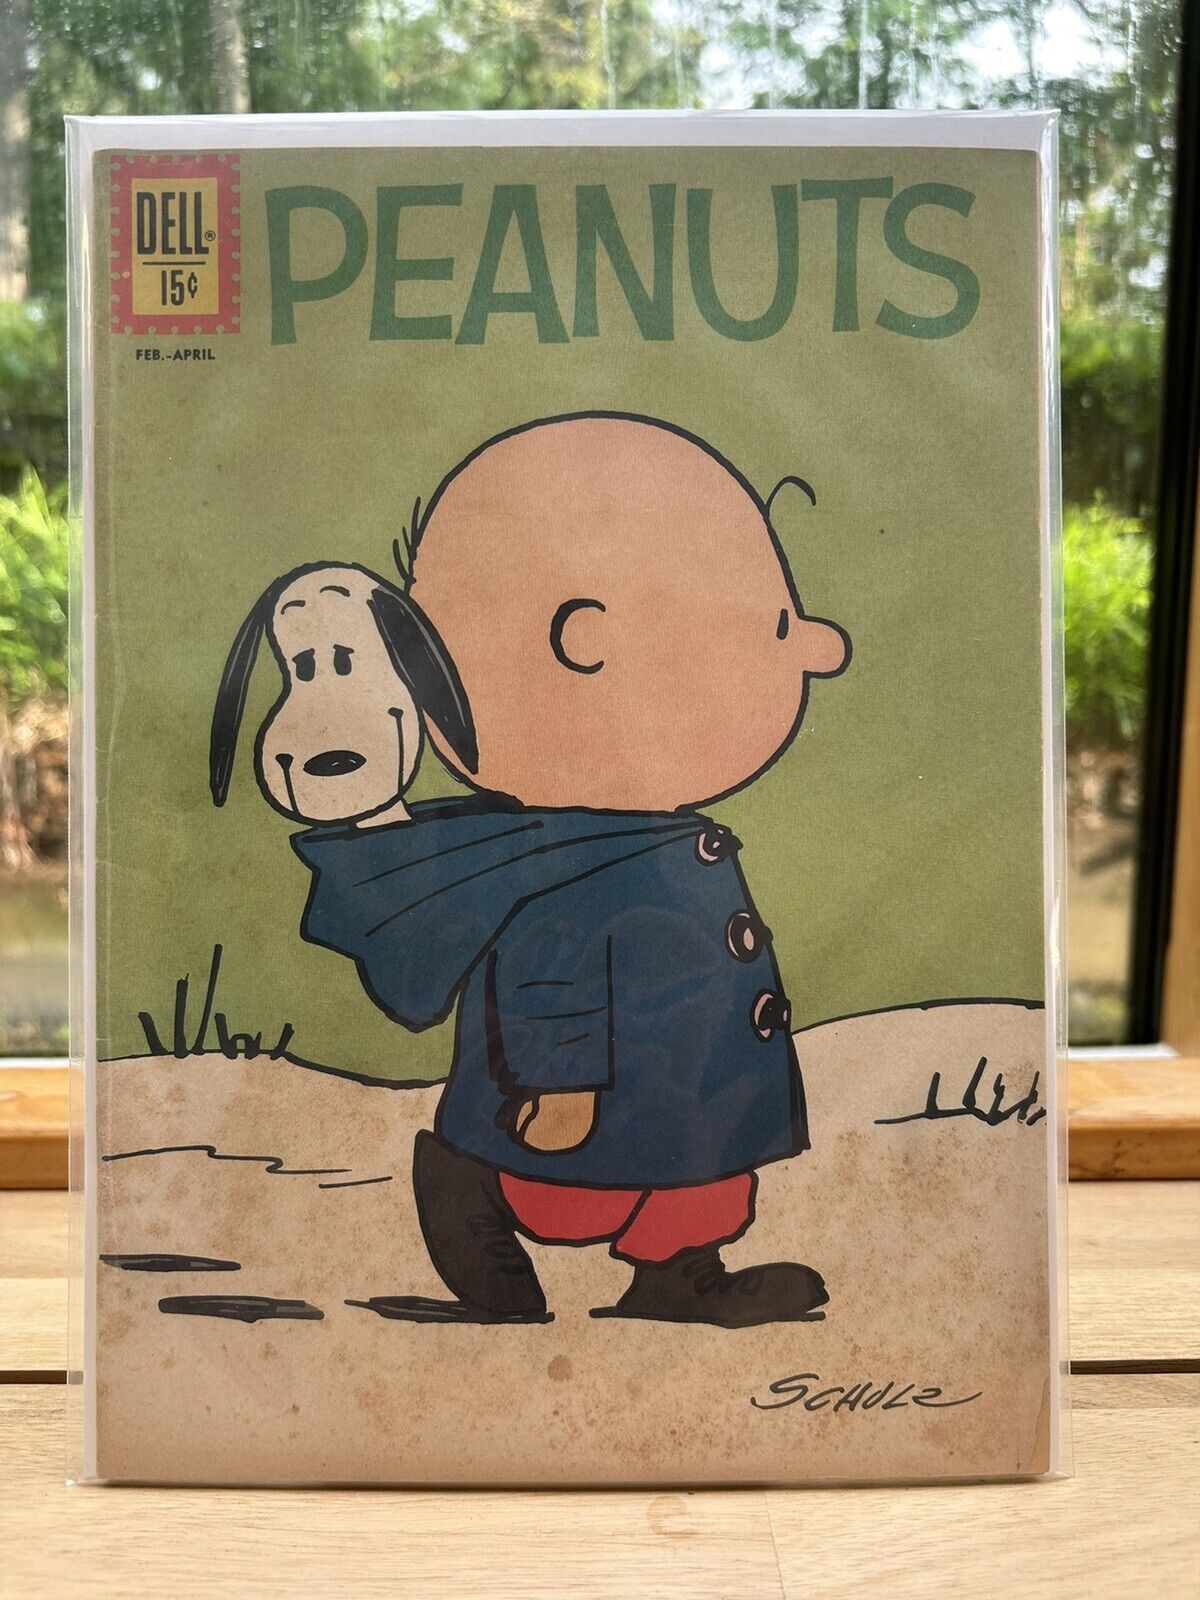 Peanuts Comic Book #12 Dell Feb-April 1962 Charles Schulz Charlie Brown Snoopy